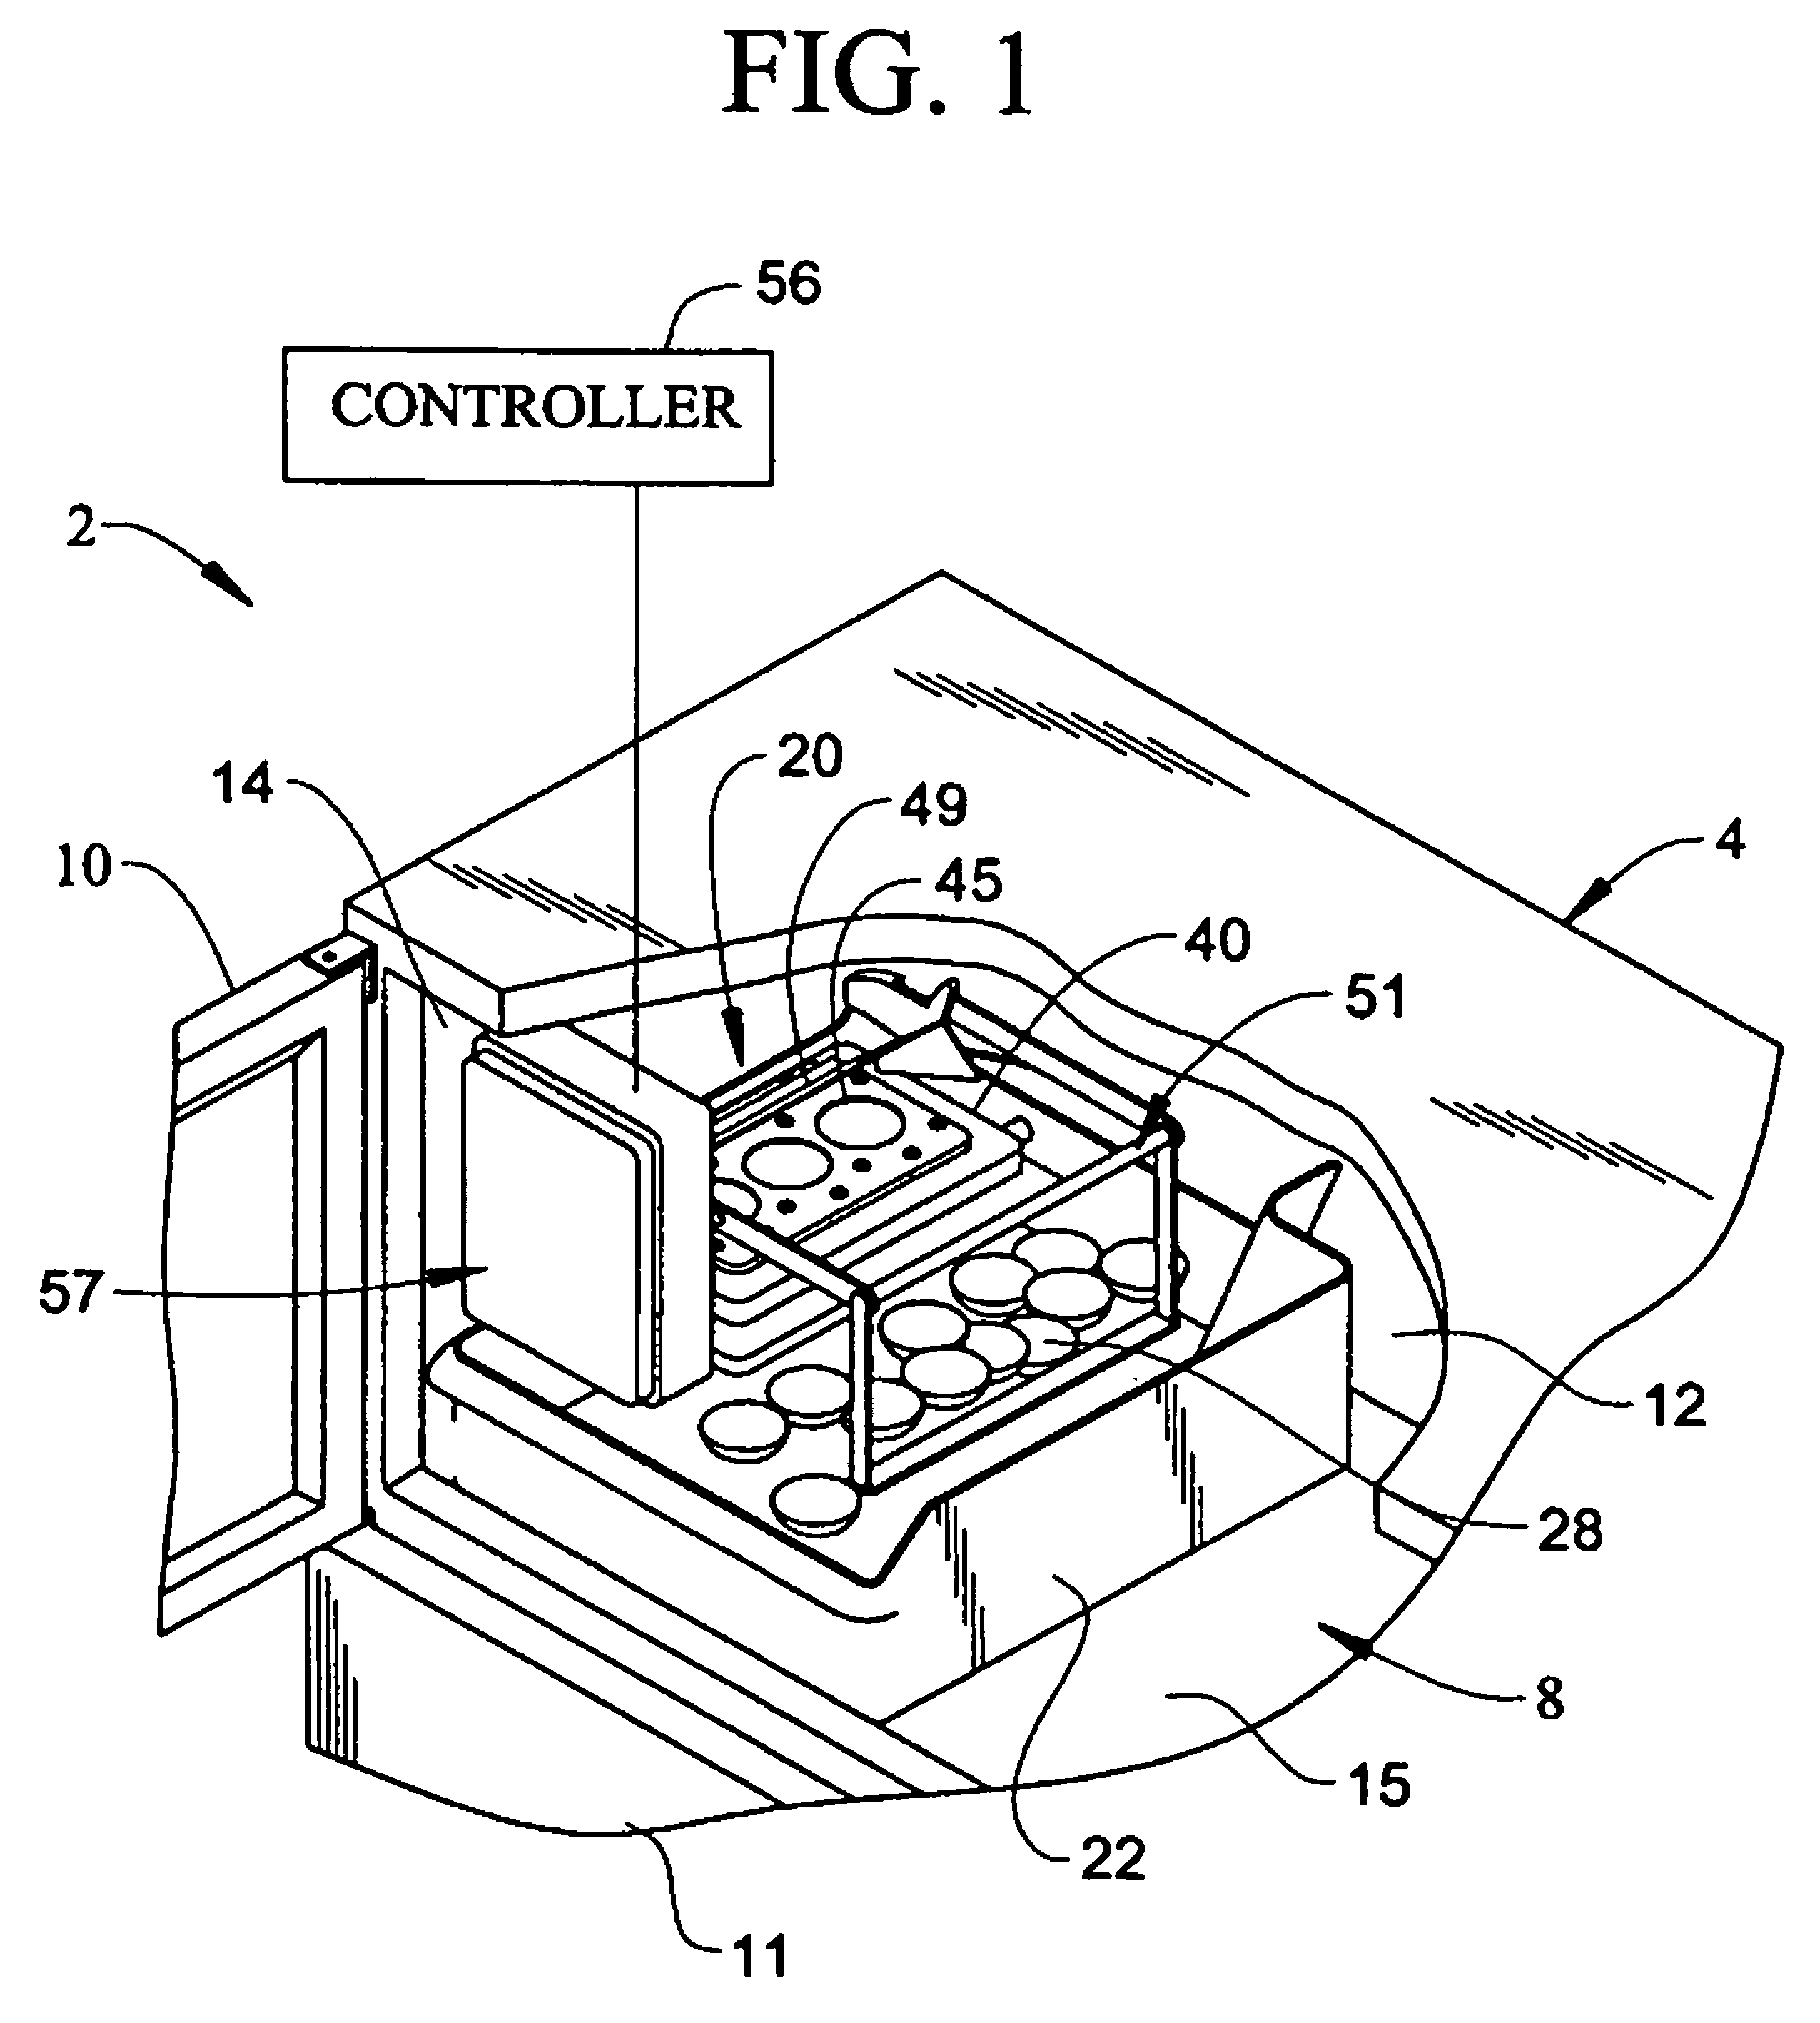 Refrigerator with an automatic compact fluid operated icemaker